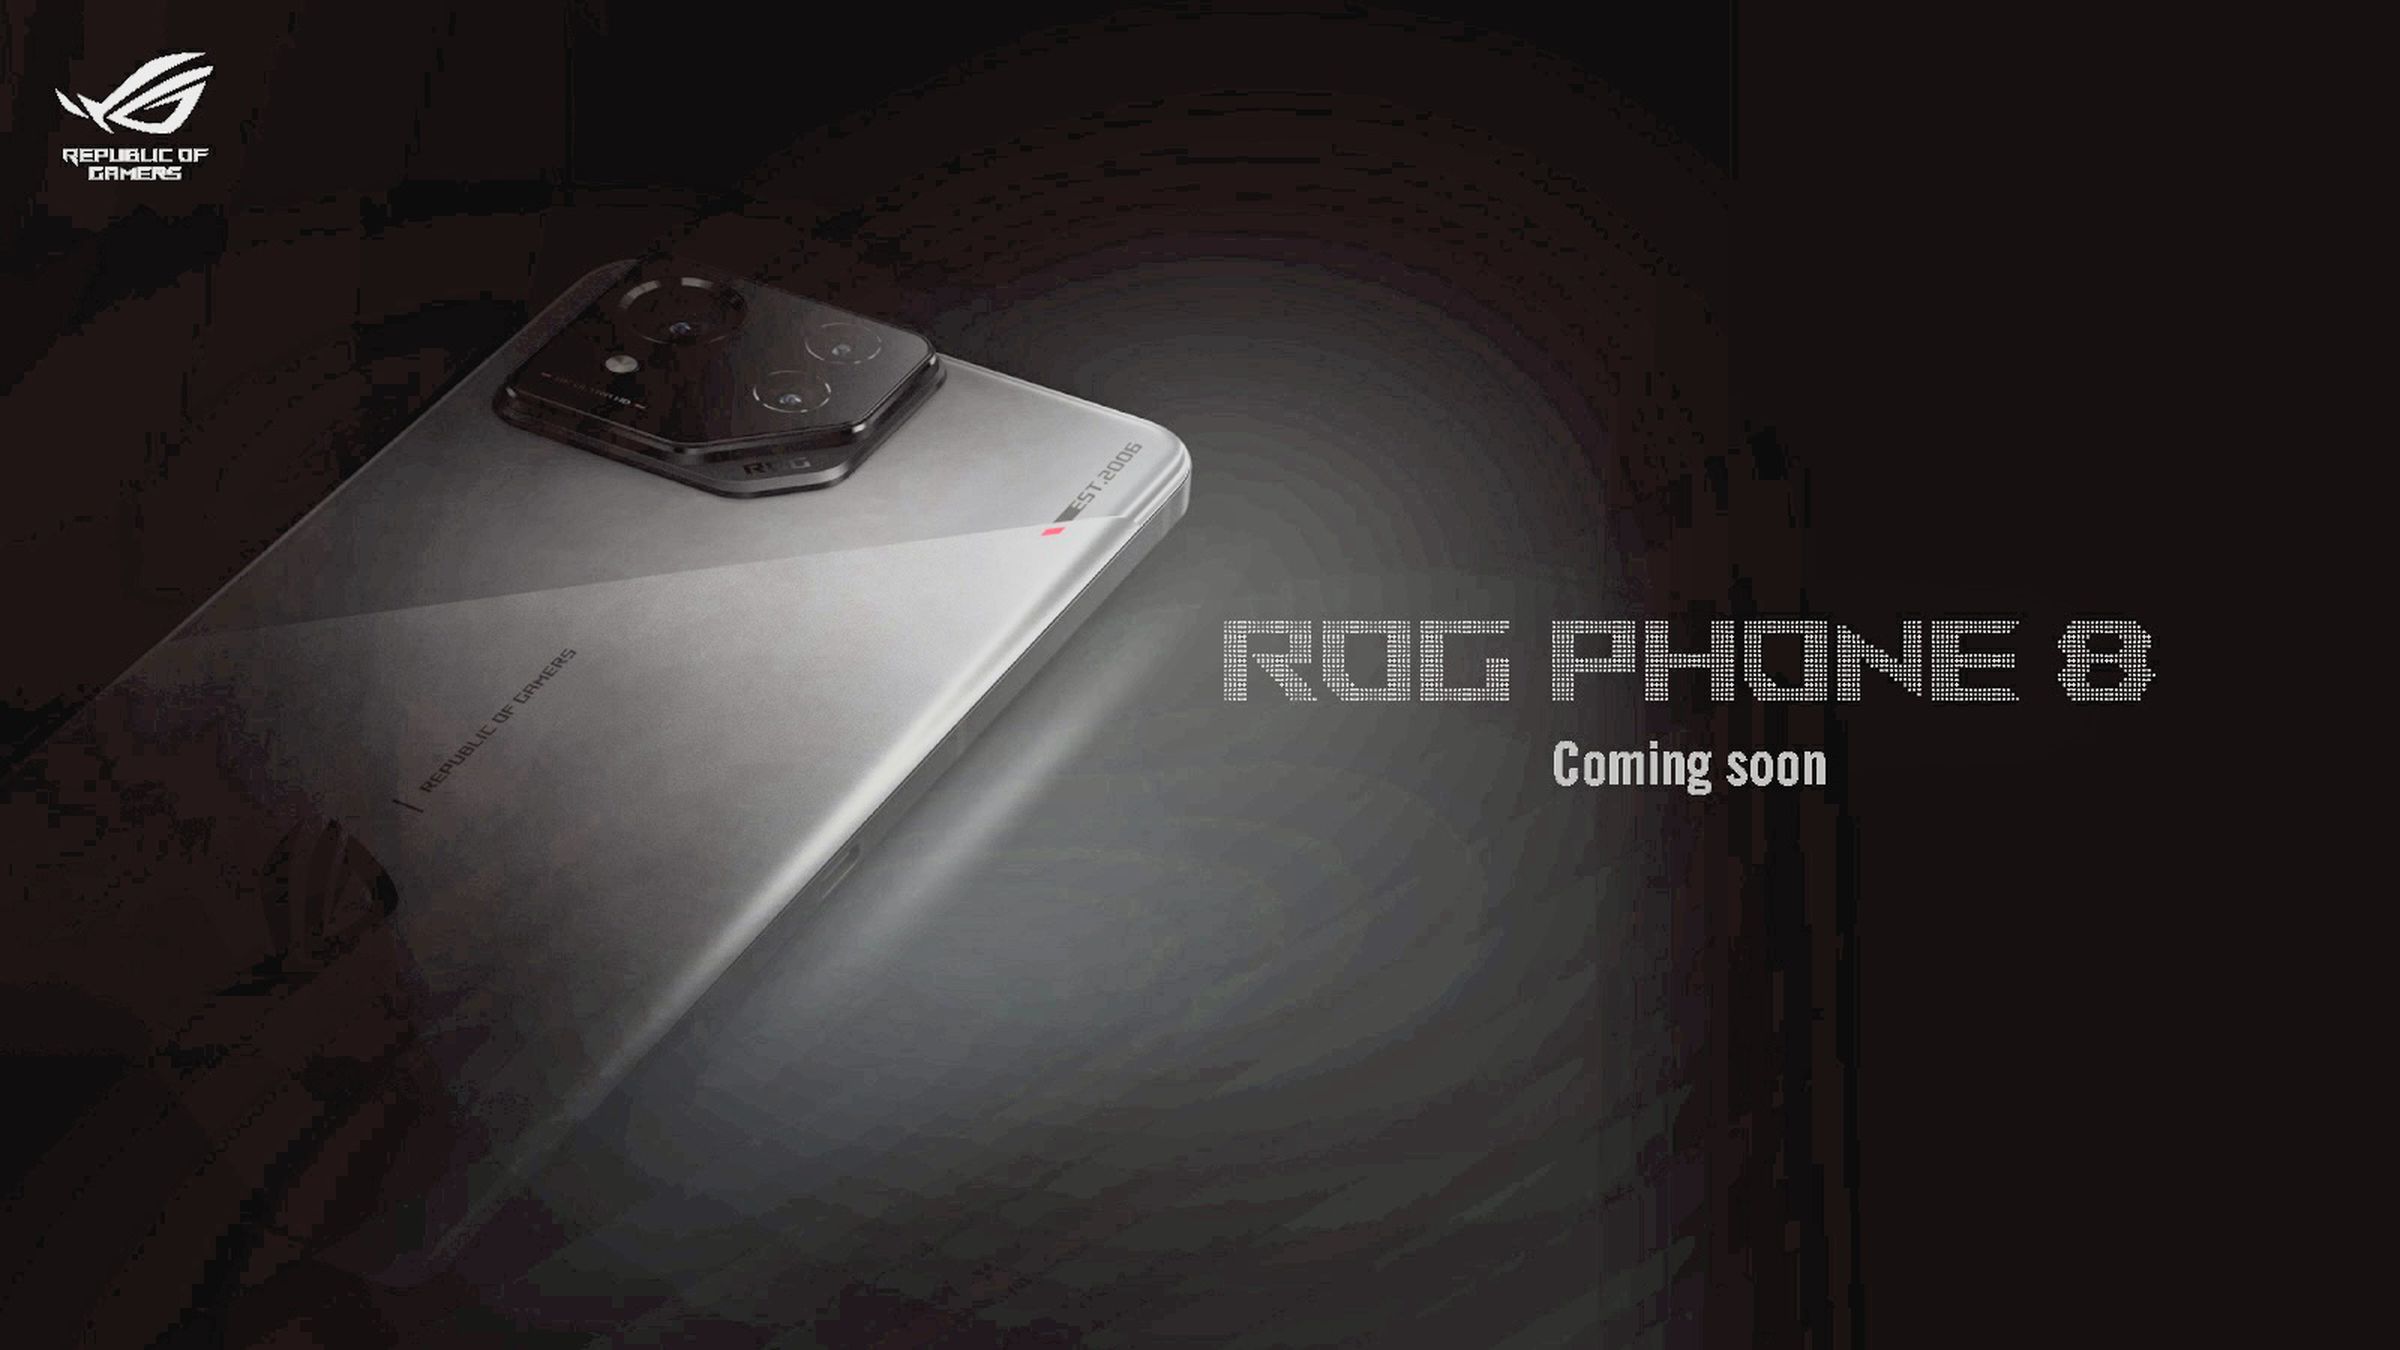 ROG Phone 8 coming soon, with a shadowy image of the phone rear and a “EST 2006” print